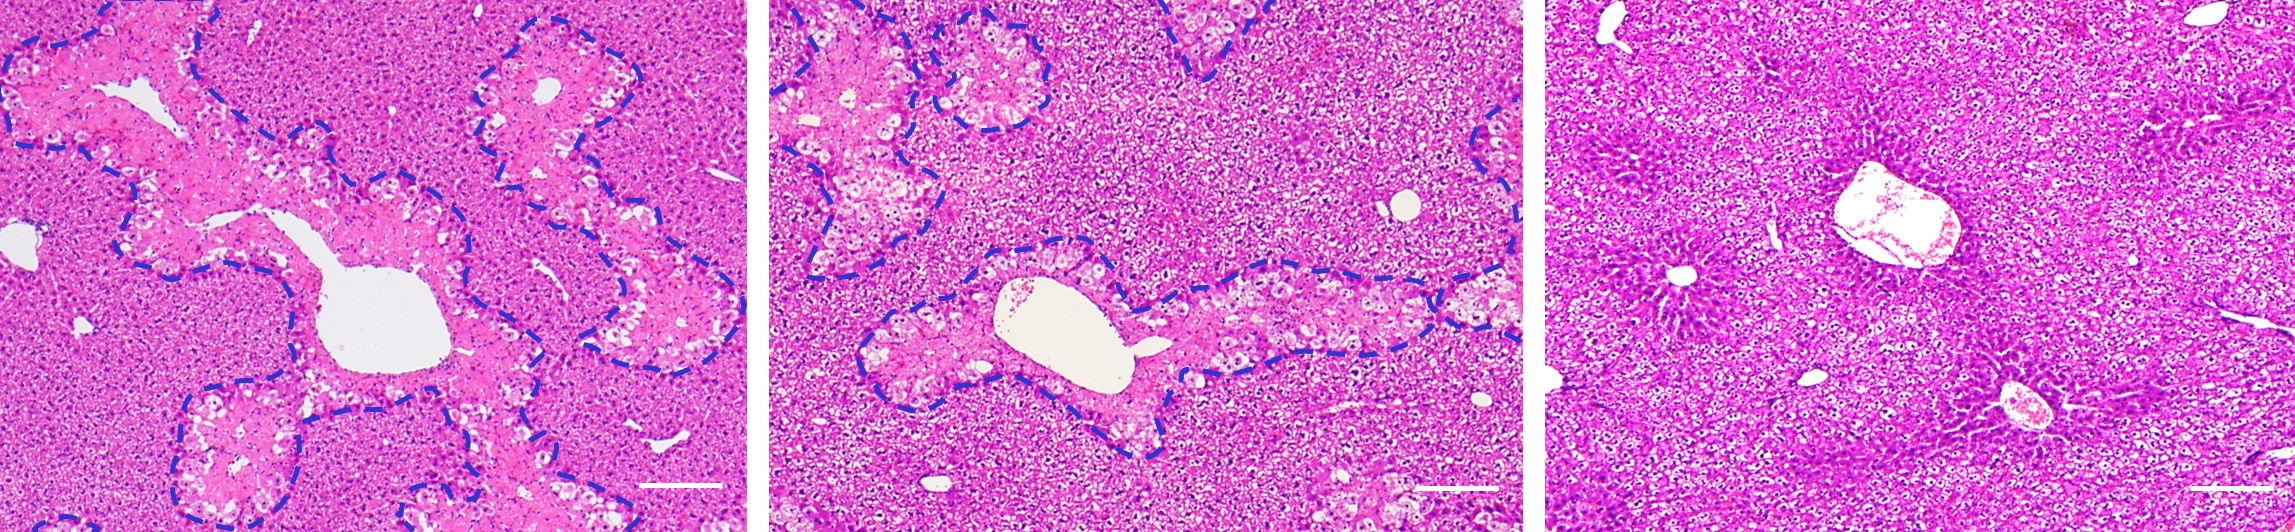 Damage to the liver induced by acetaminophen (dotted blue outlines) is almost completely mitigated by CoQ10-MITO-Porter (right), compared to the effect of phosphate buffered saline (left) and direct administration of CoQ10(center). (Mitsue Hibino, et al. Scientific Reports. May 10, 2023).